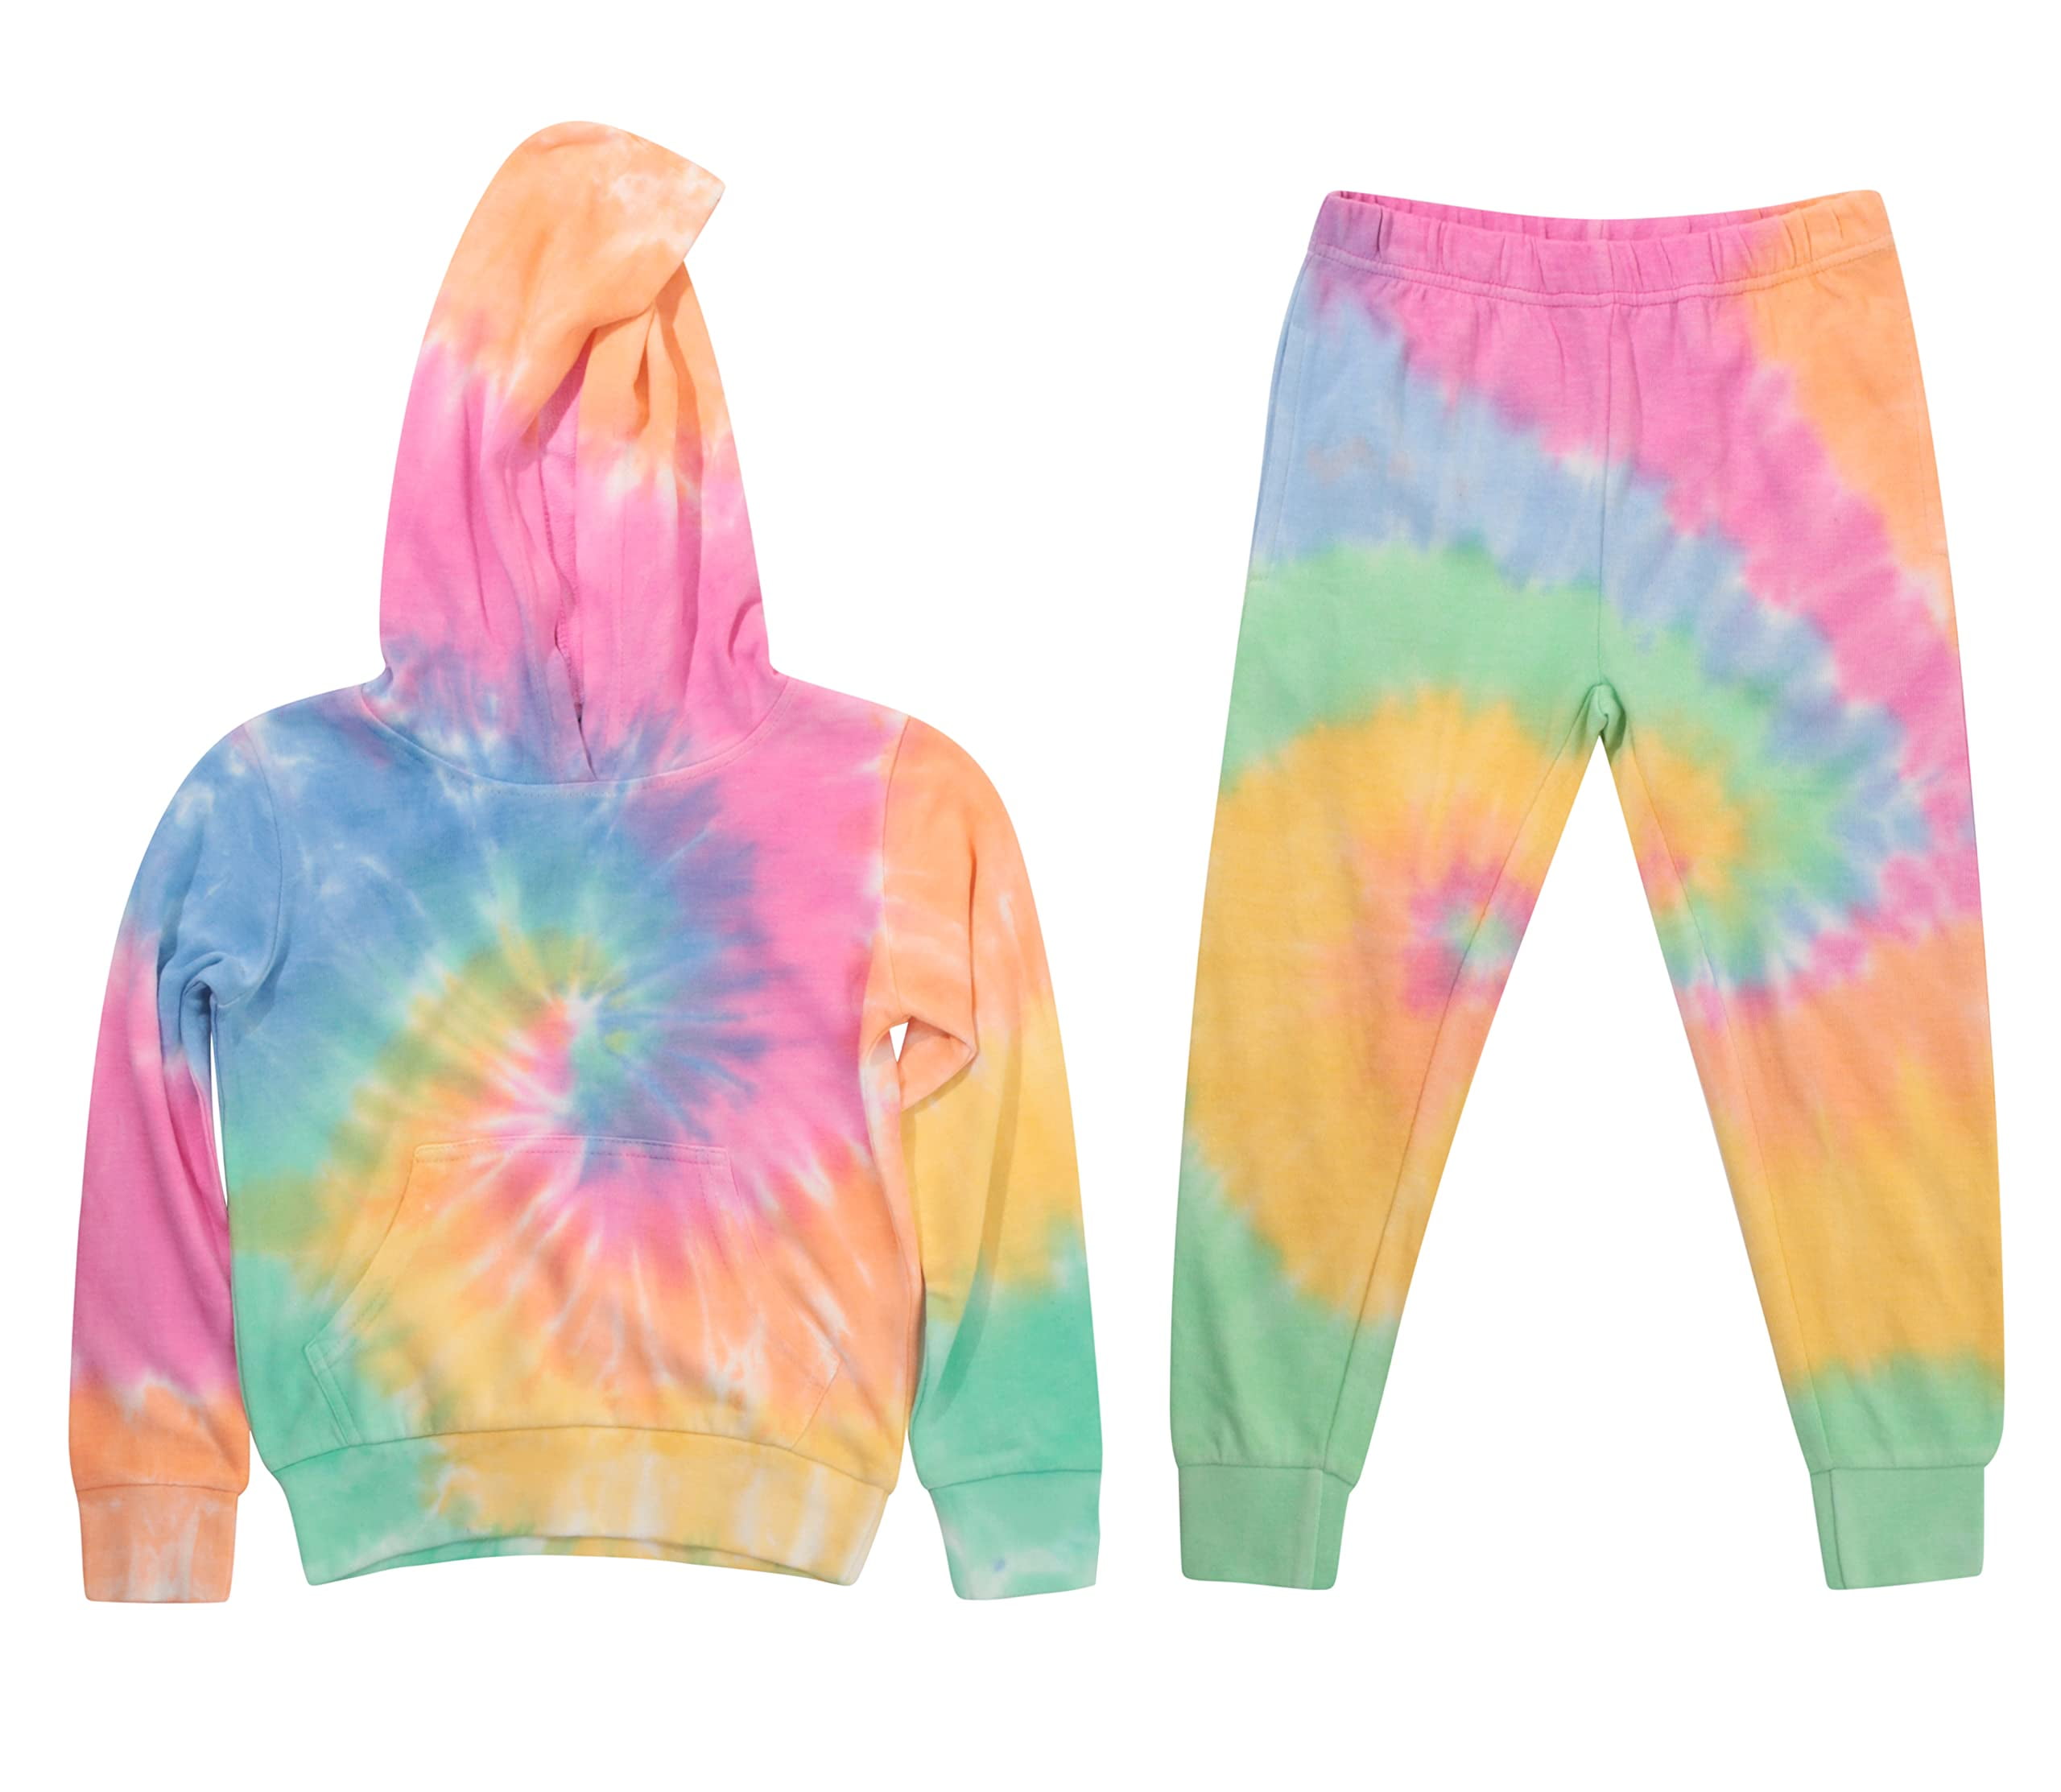 Just Love Tie Dye Sweatshirt and Jogger Pants for Girls 17622-10588-10 ...